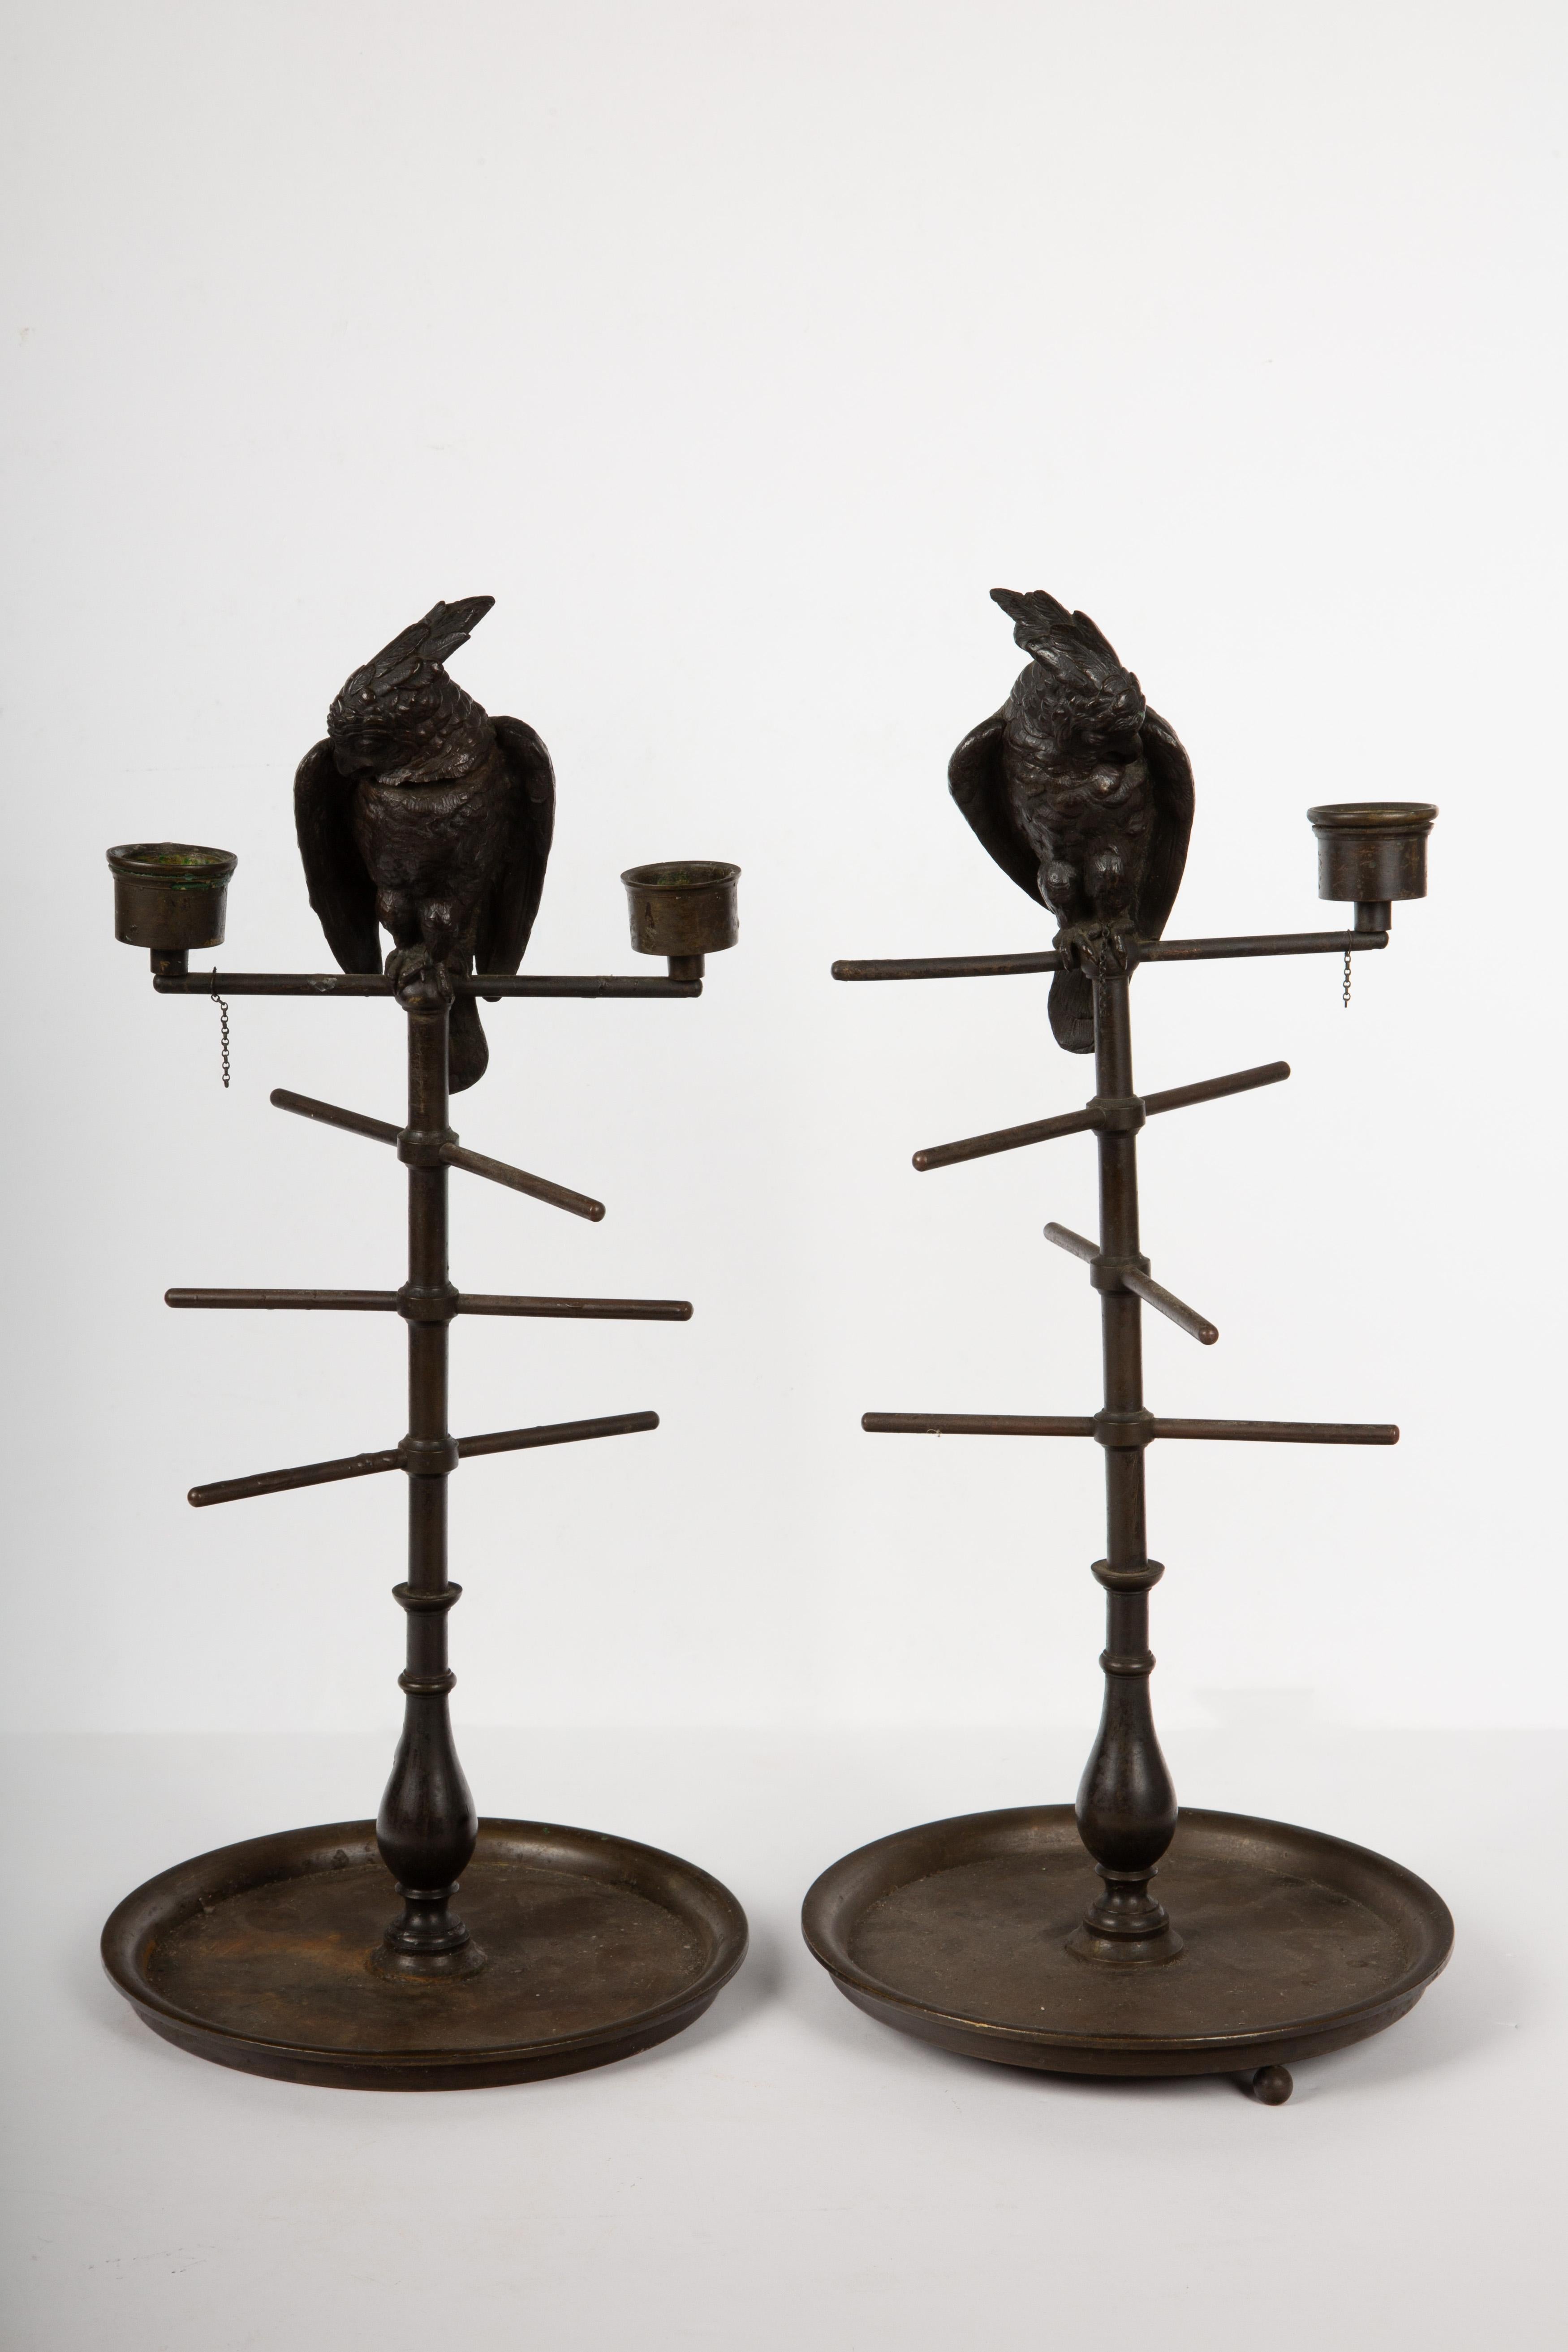 These exquisite 19th-century bronze parakeet on perch candlestick inkwells showcase the fine craftsmanship of the era. Each inkwell features a beautifully designed parakeet with a hinged head that opens to reveal a well for ink. The intricate